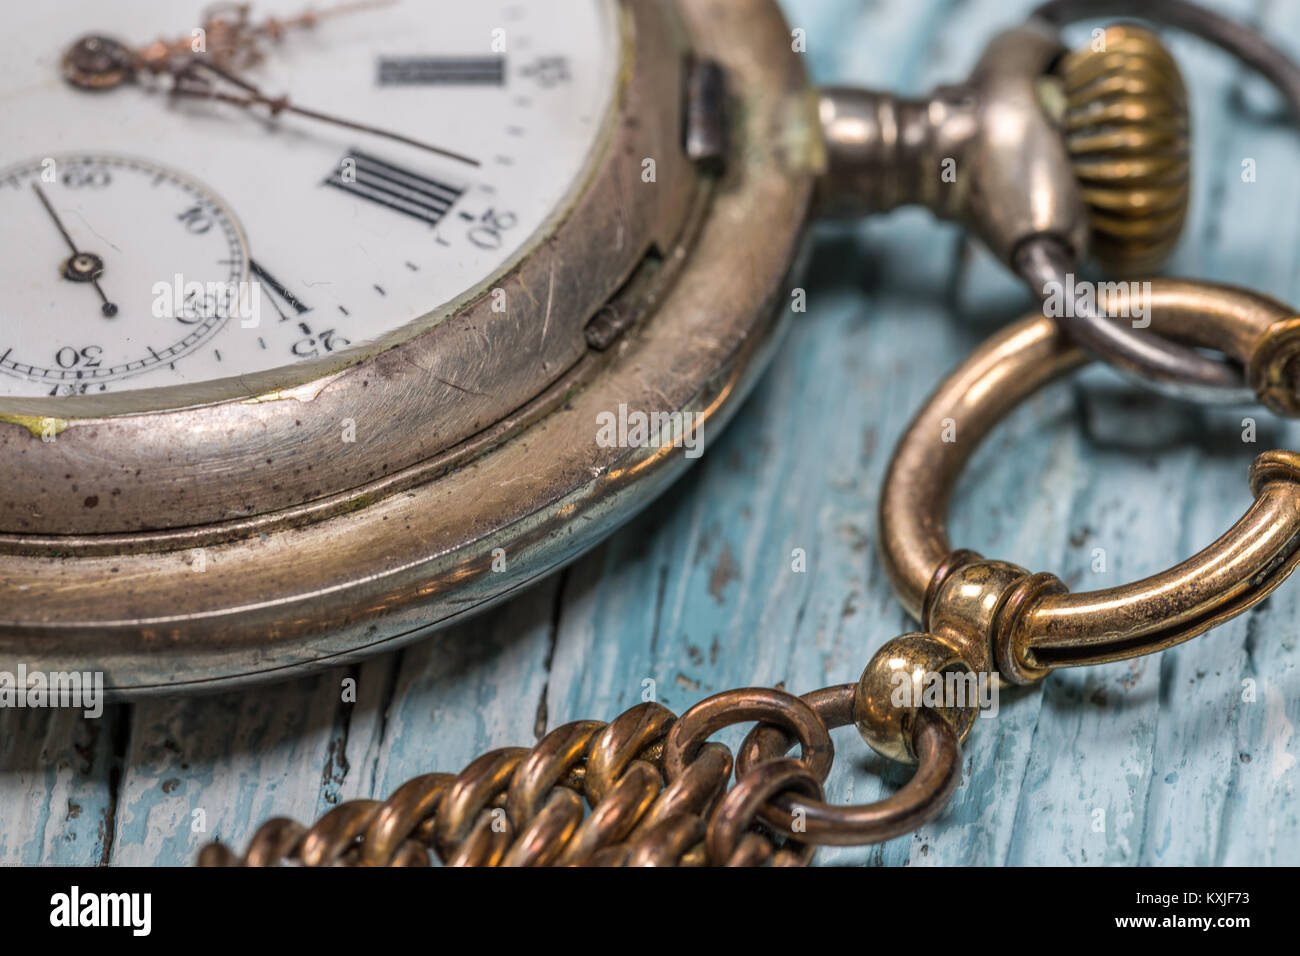 Close-Up image of Old pocket watch on wooden table Stock Photo